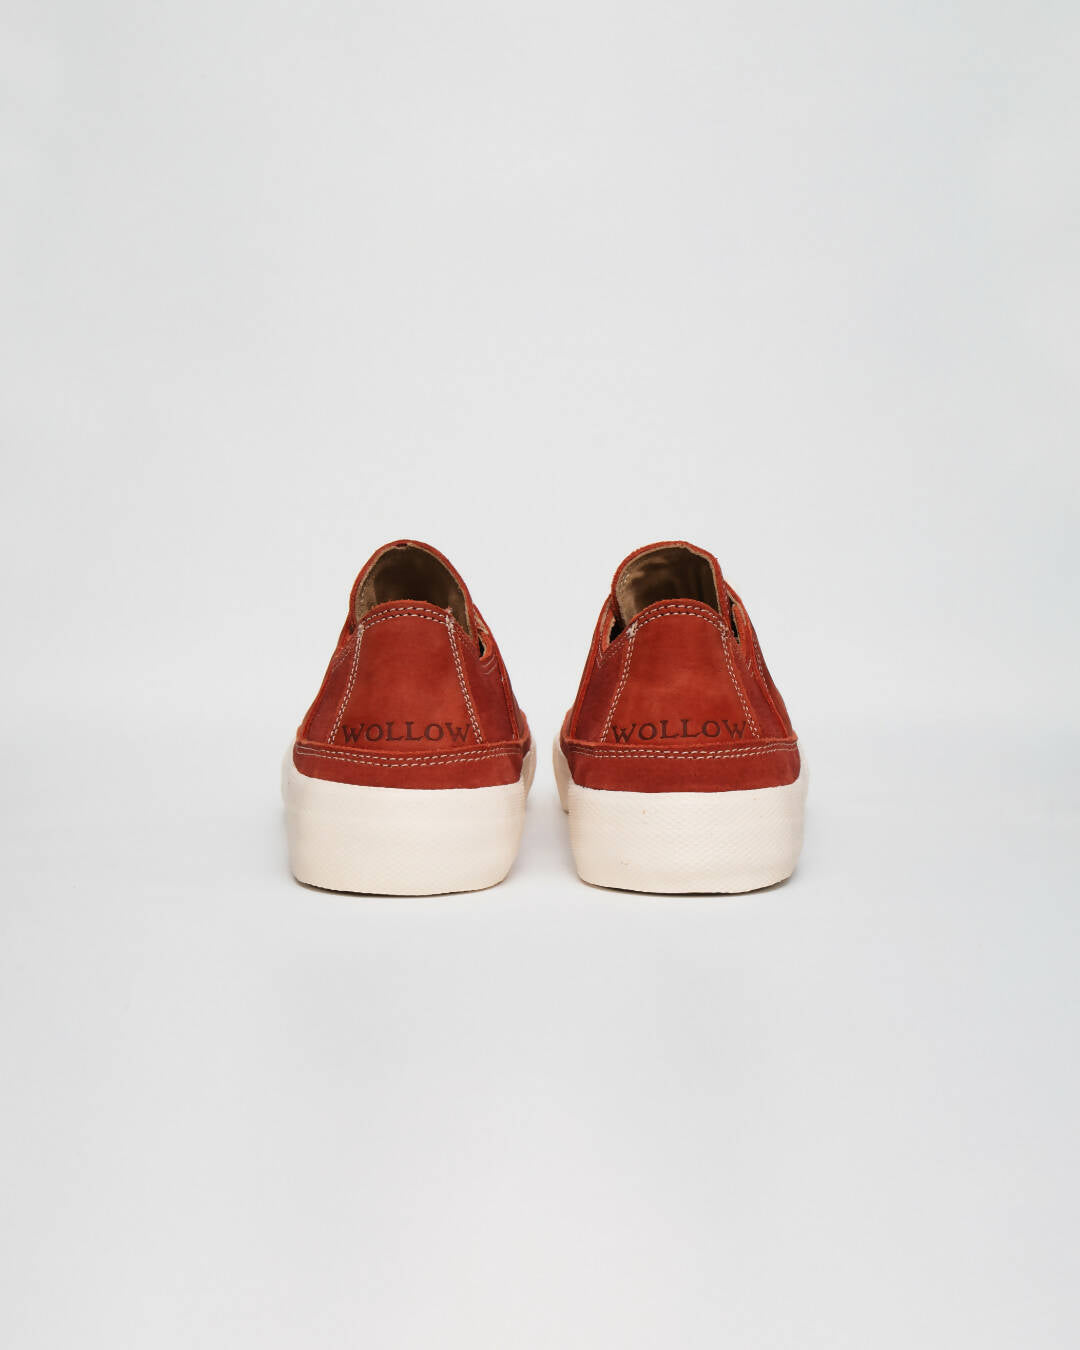 TARMAC - CLAY RED WOLLOW